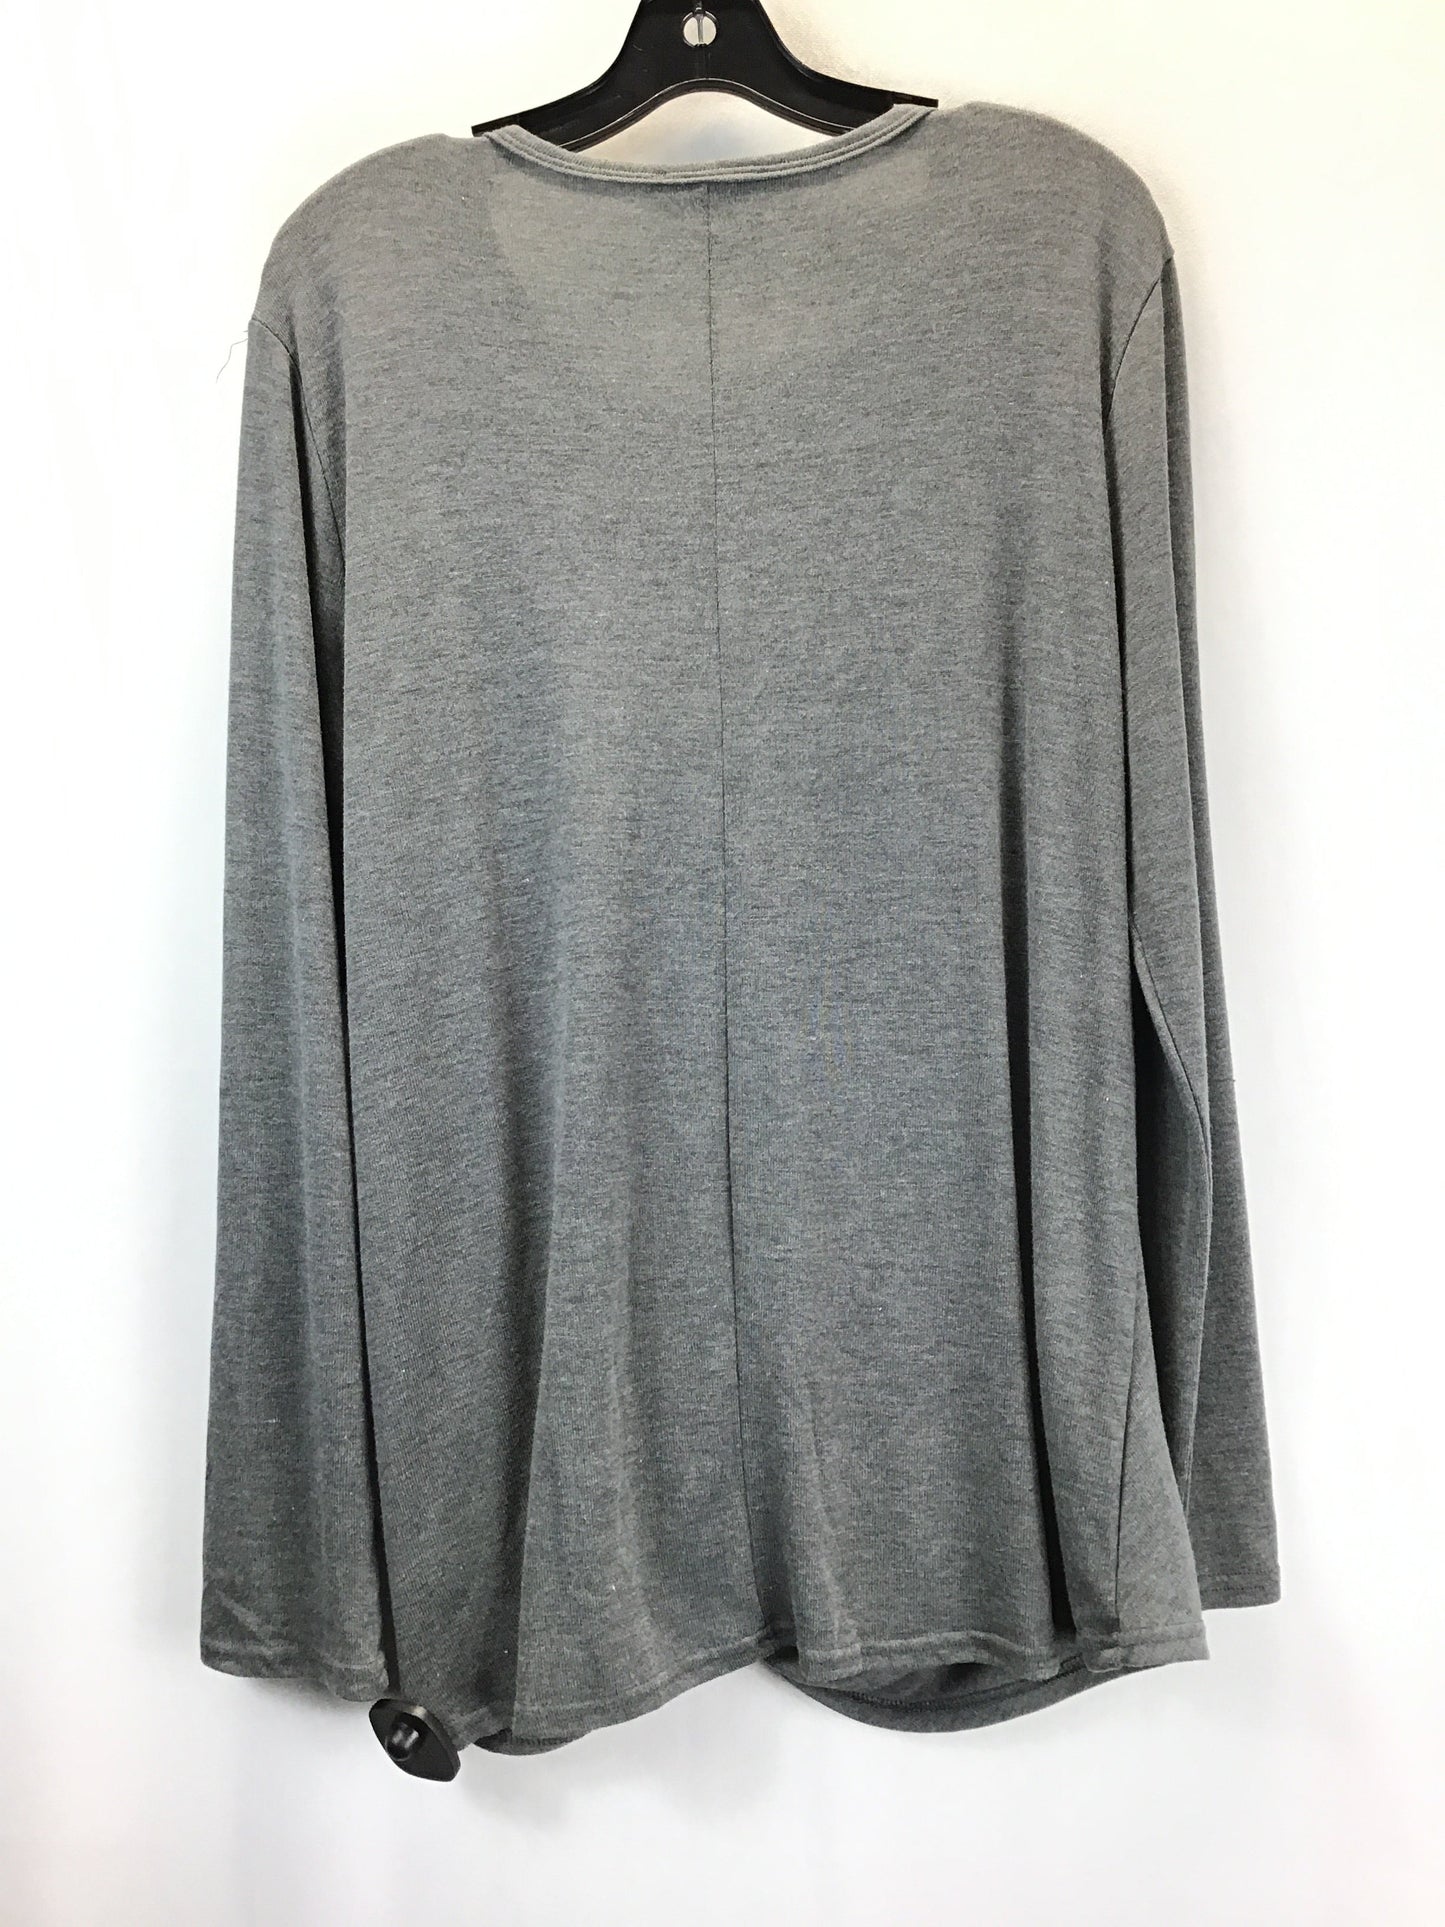 Top Long Sleeve By She + Sky  Size: 1x